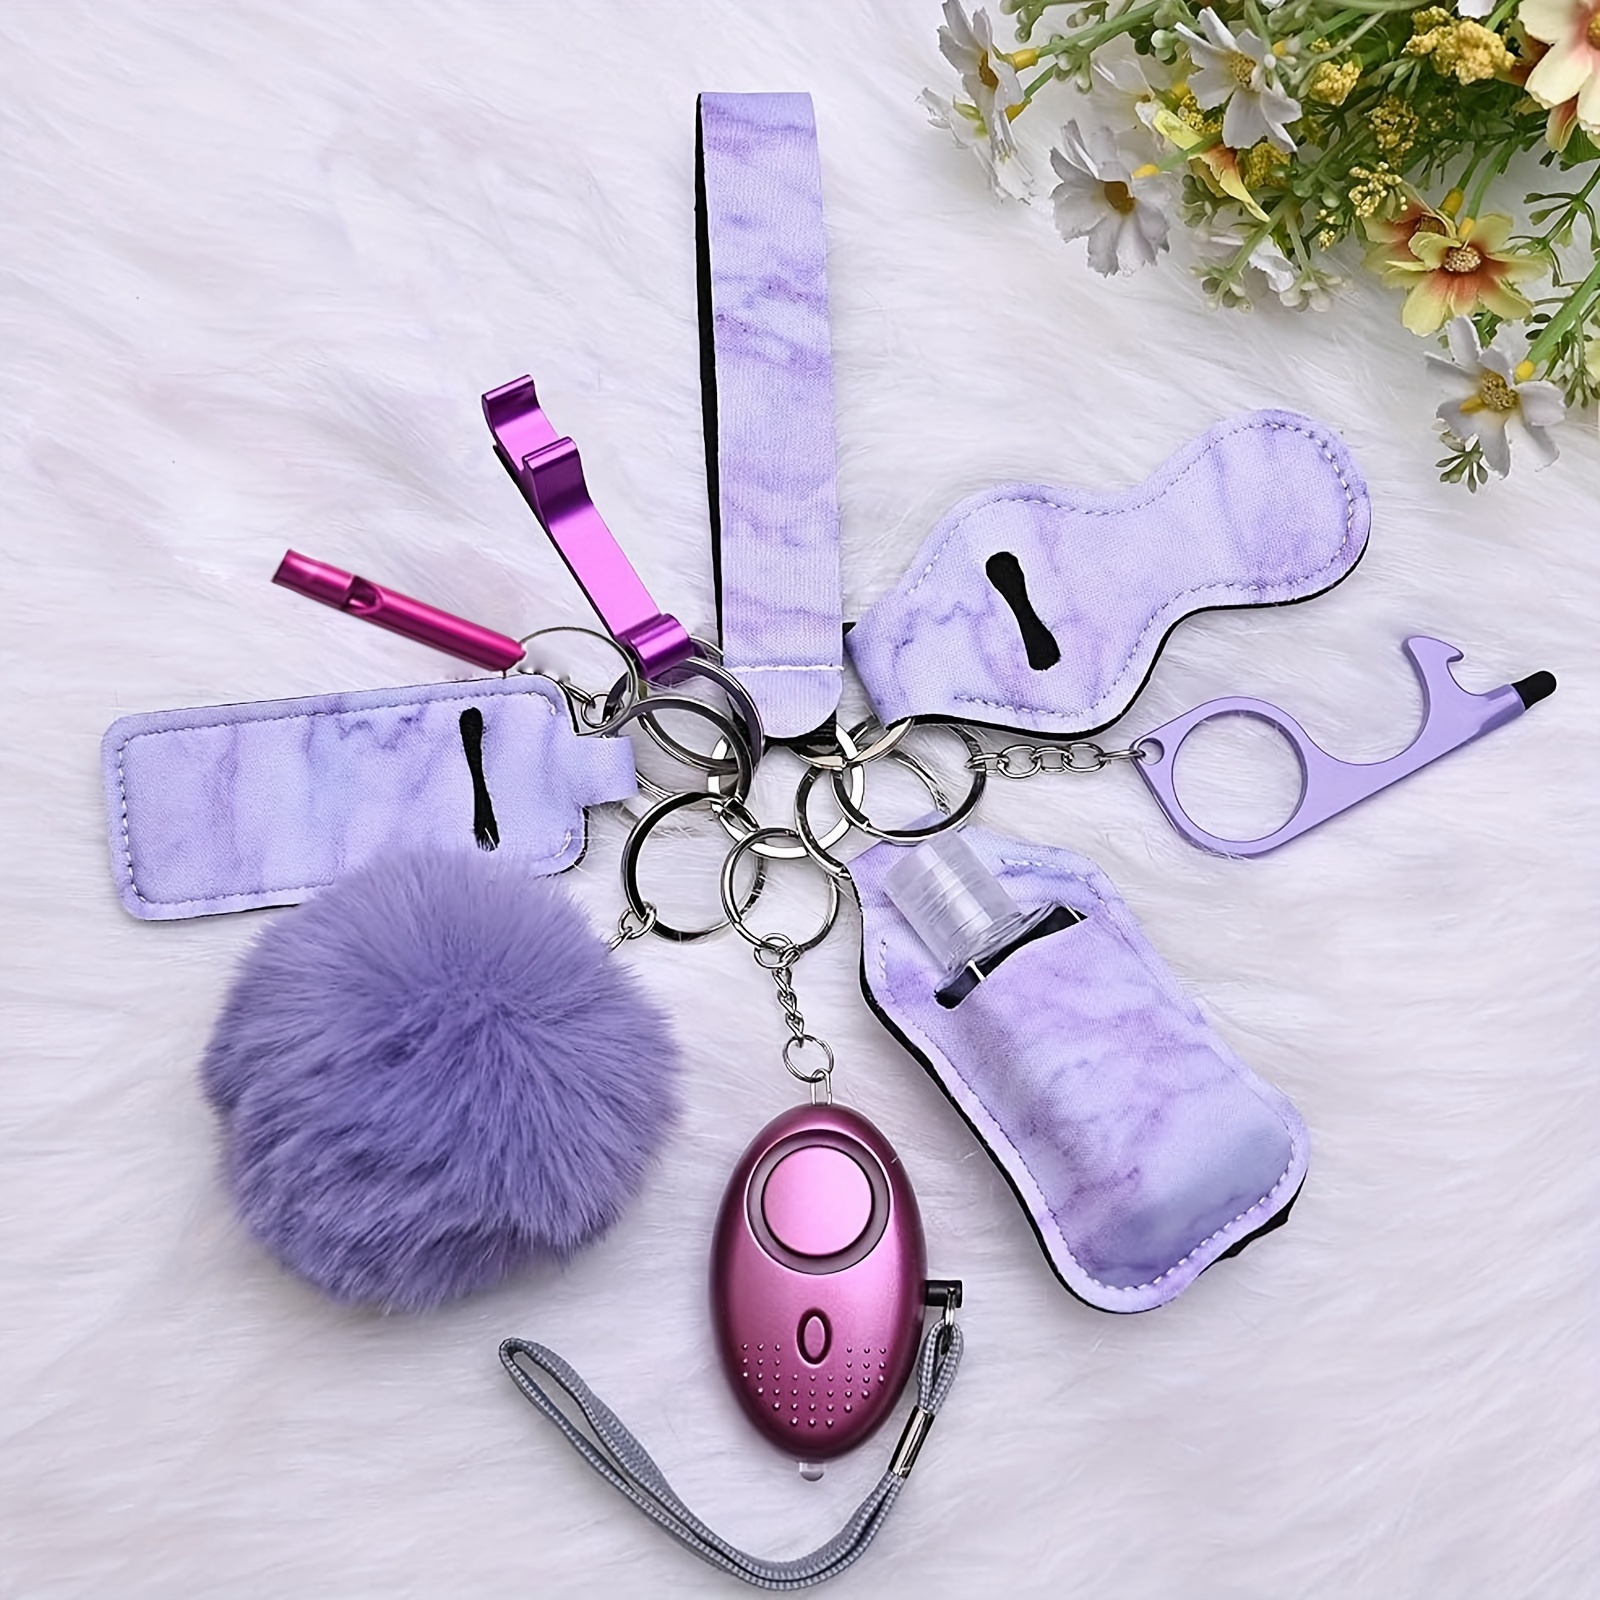 

Women's Safety Key Chain Set, 10 Pieces Of Safety Key Chain Accessories, Touchless Door Opener, Whistle And Pompon, Purple